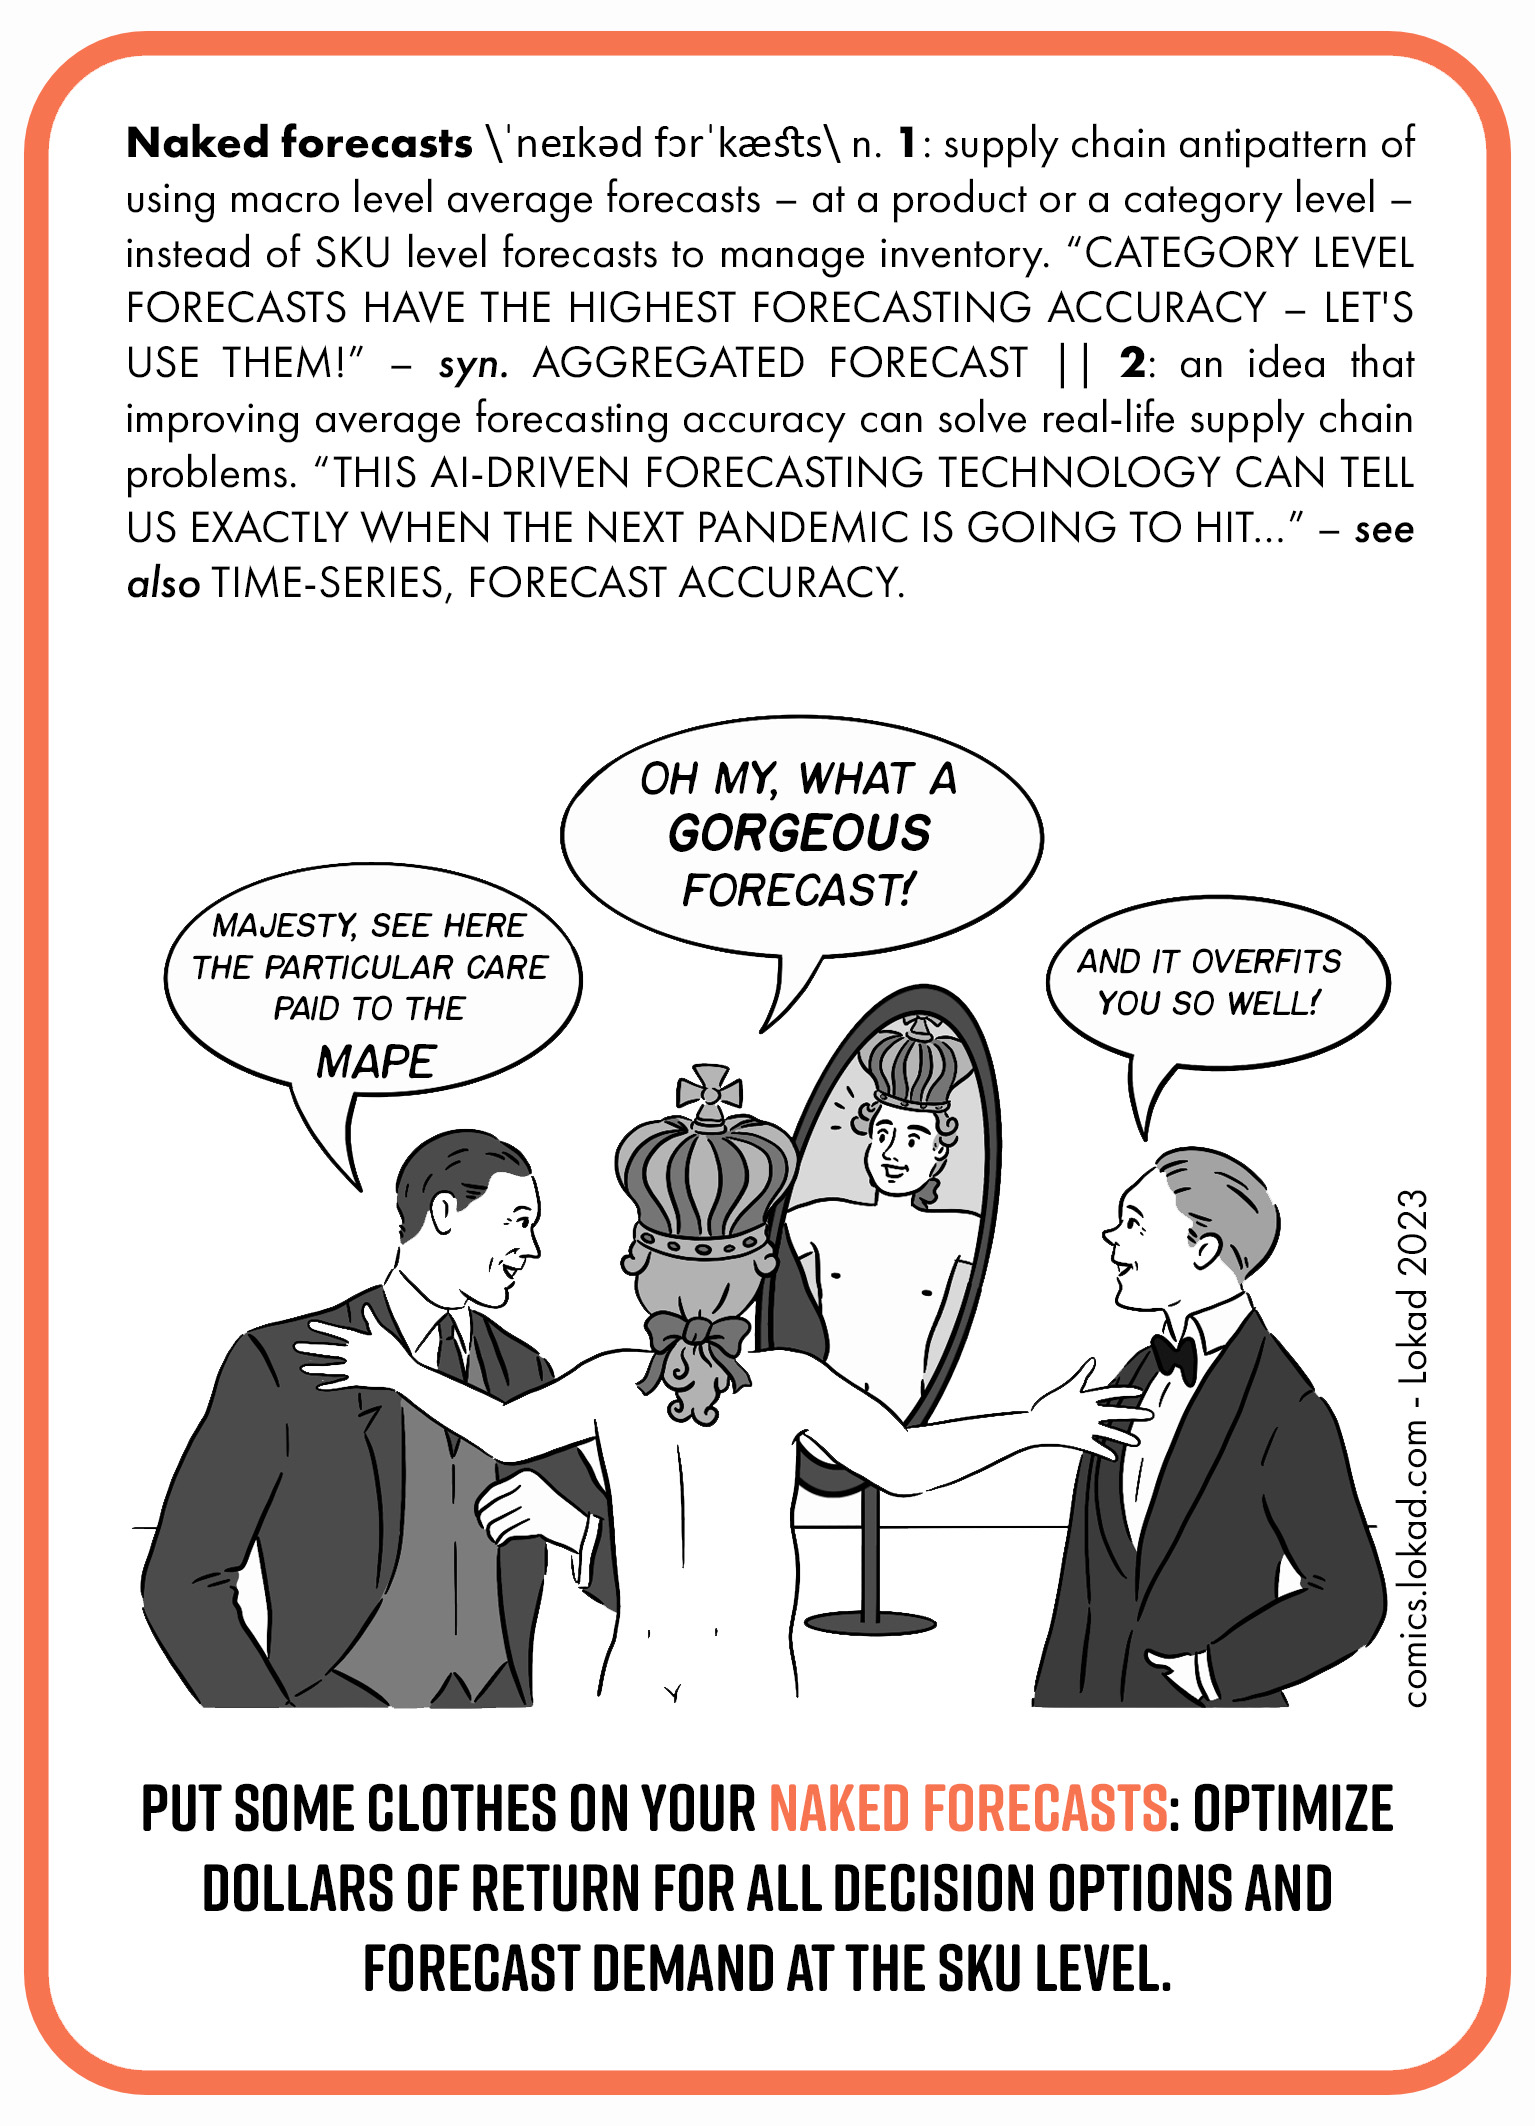 A flashcard detailing 'Naked Forecasts' antipattern in supply chain management. Naked forecasts refer to using macro-level average forecasts instead of SKU-level forecasts for inventory. It critiques the overreliance on aggregated forecasting accuracy and the false belief it can solve supply chain issues. The humorous image depicts a man flattering a king for a 'gorgeous' forecast, metaphorically dressing him with the forecast, highlighting the inappropriateness of one-size-fits-all forecasting. The card encourages dressing naked forecasts with detailed SKU-level forecasting.